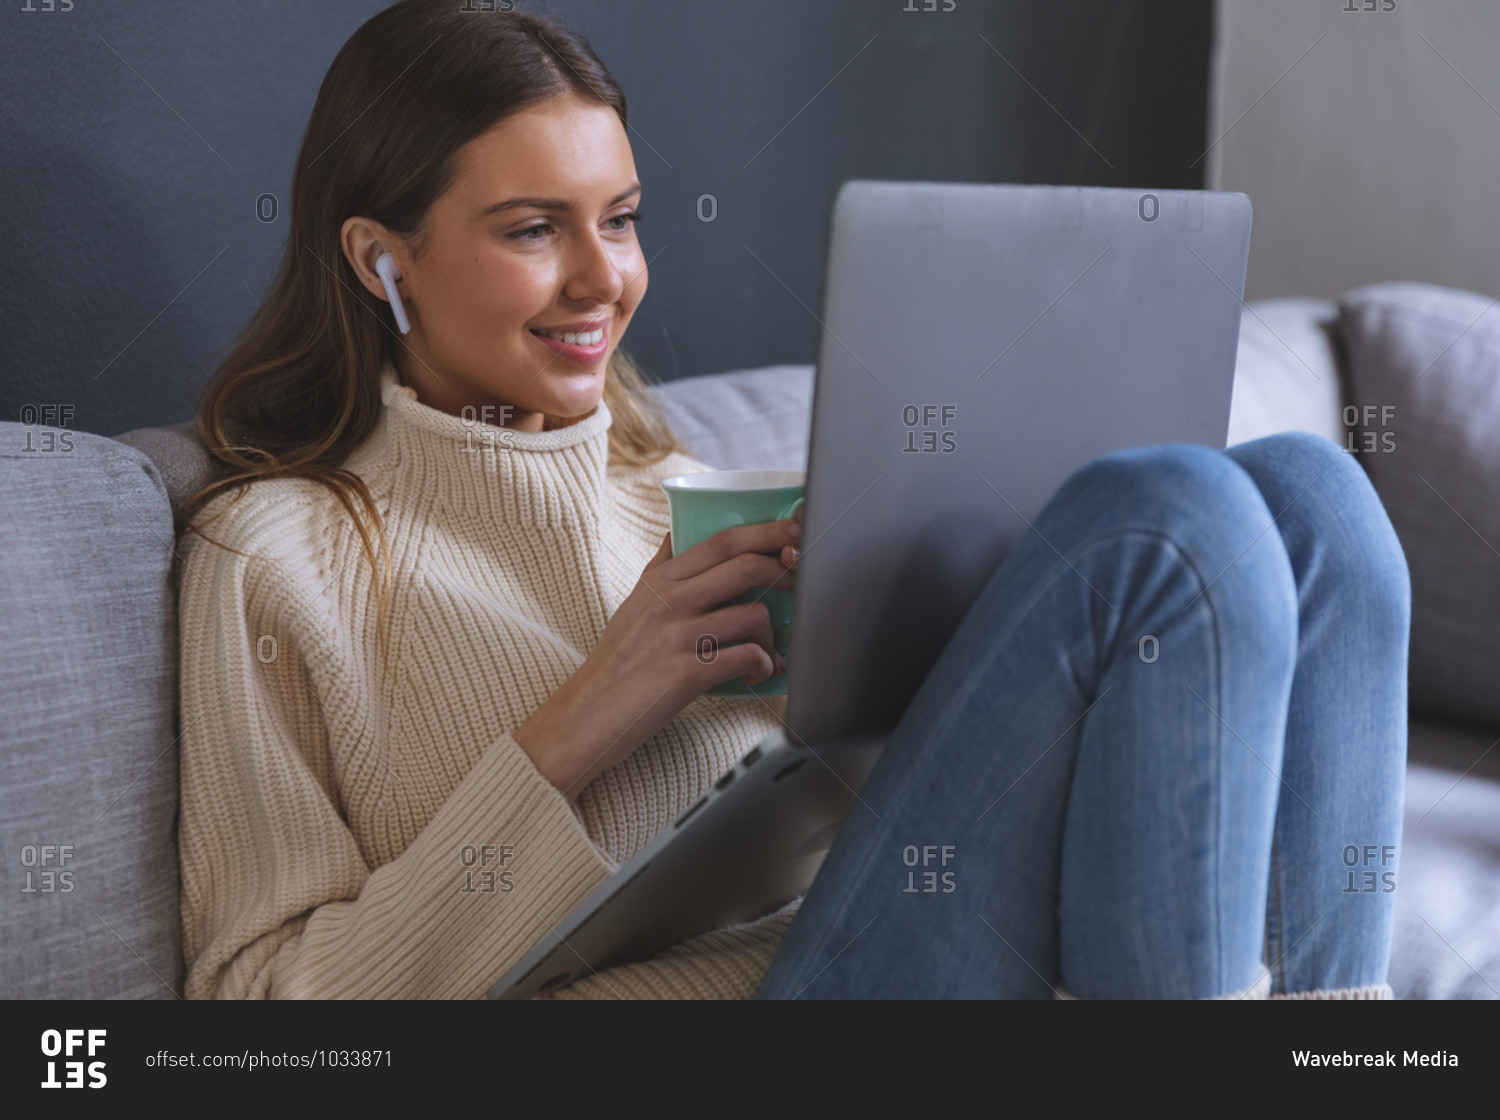 Smiling Caucasian woman spending time at home, sitting on sofa in sitting room using laptop computer with earphones, holding mug. Social distancing during Covid 19 Coronavirus quarantine lockdown.